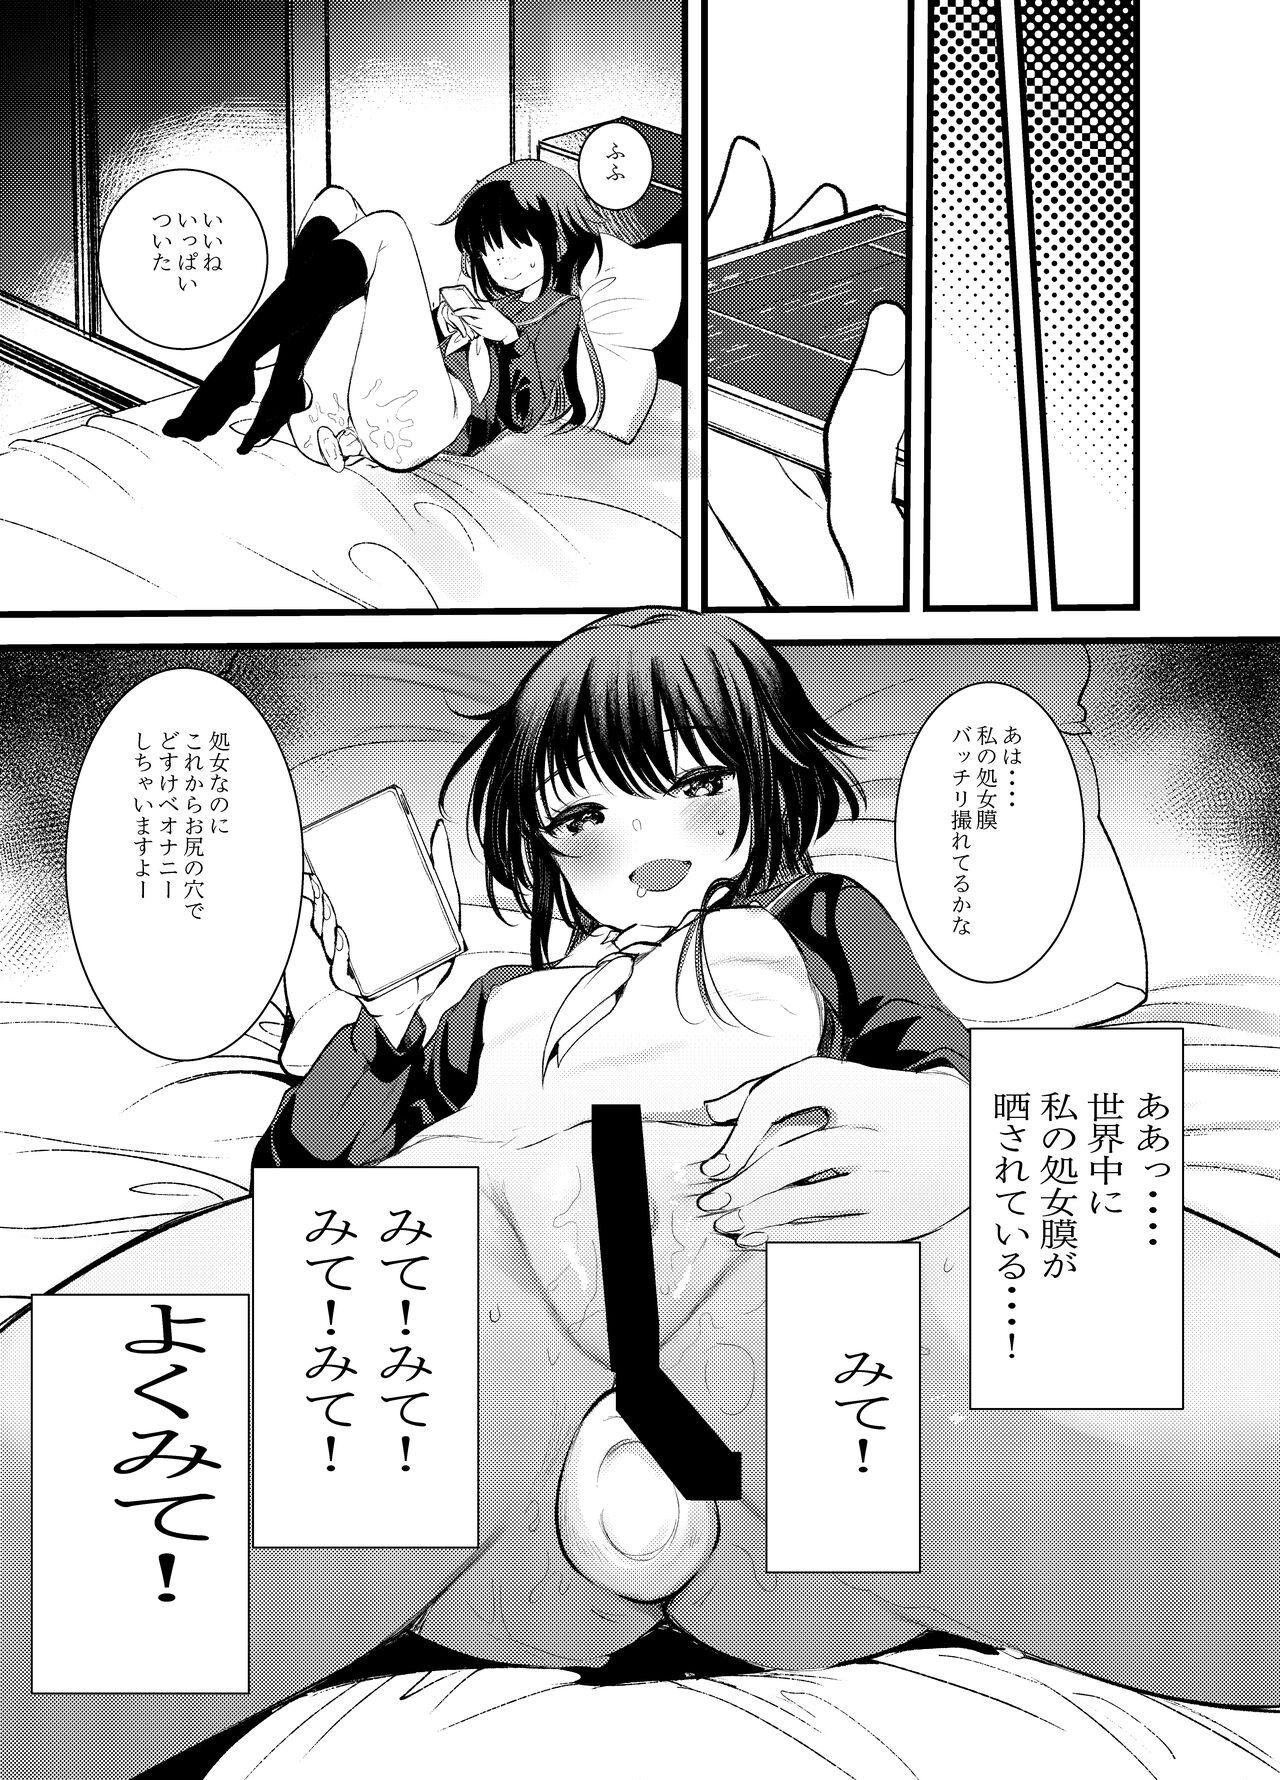 Nude えっち大好き女の子あつめました - Original Thick - Page 9